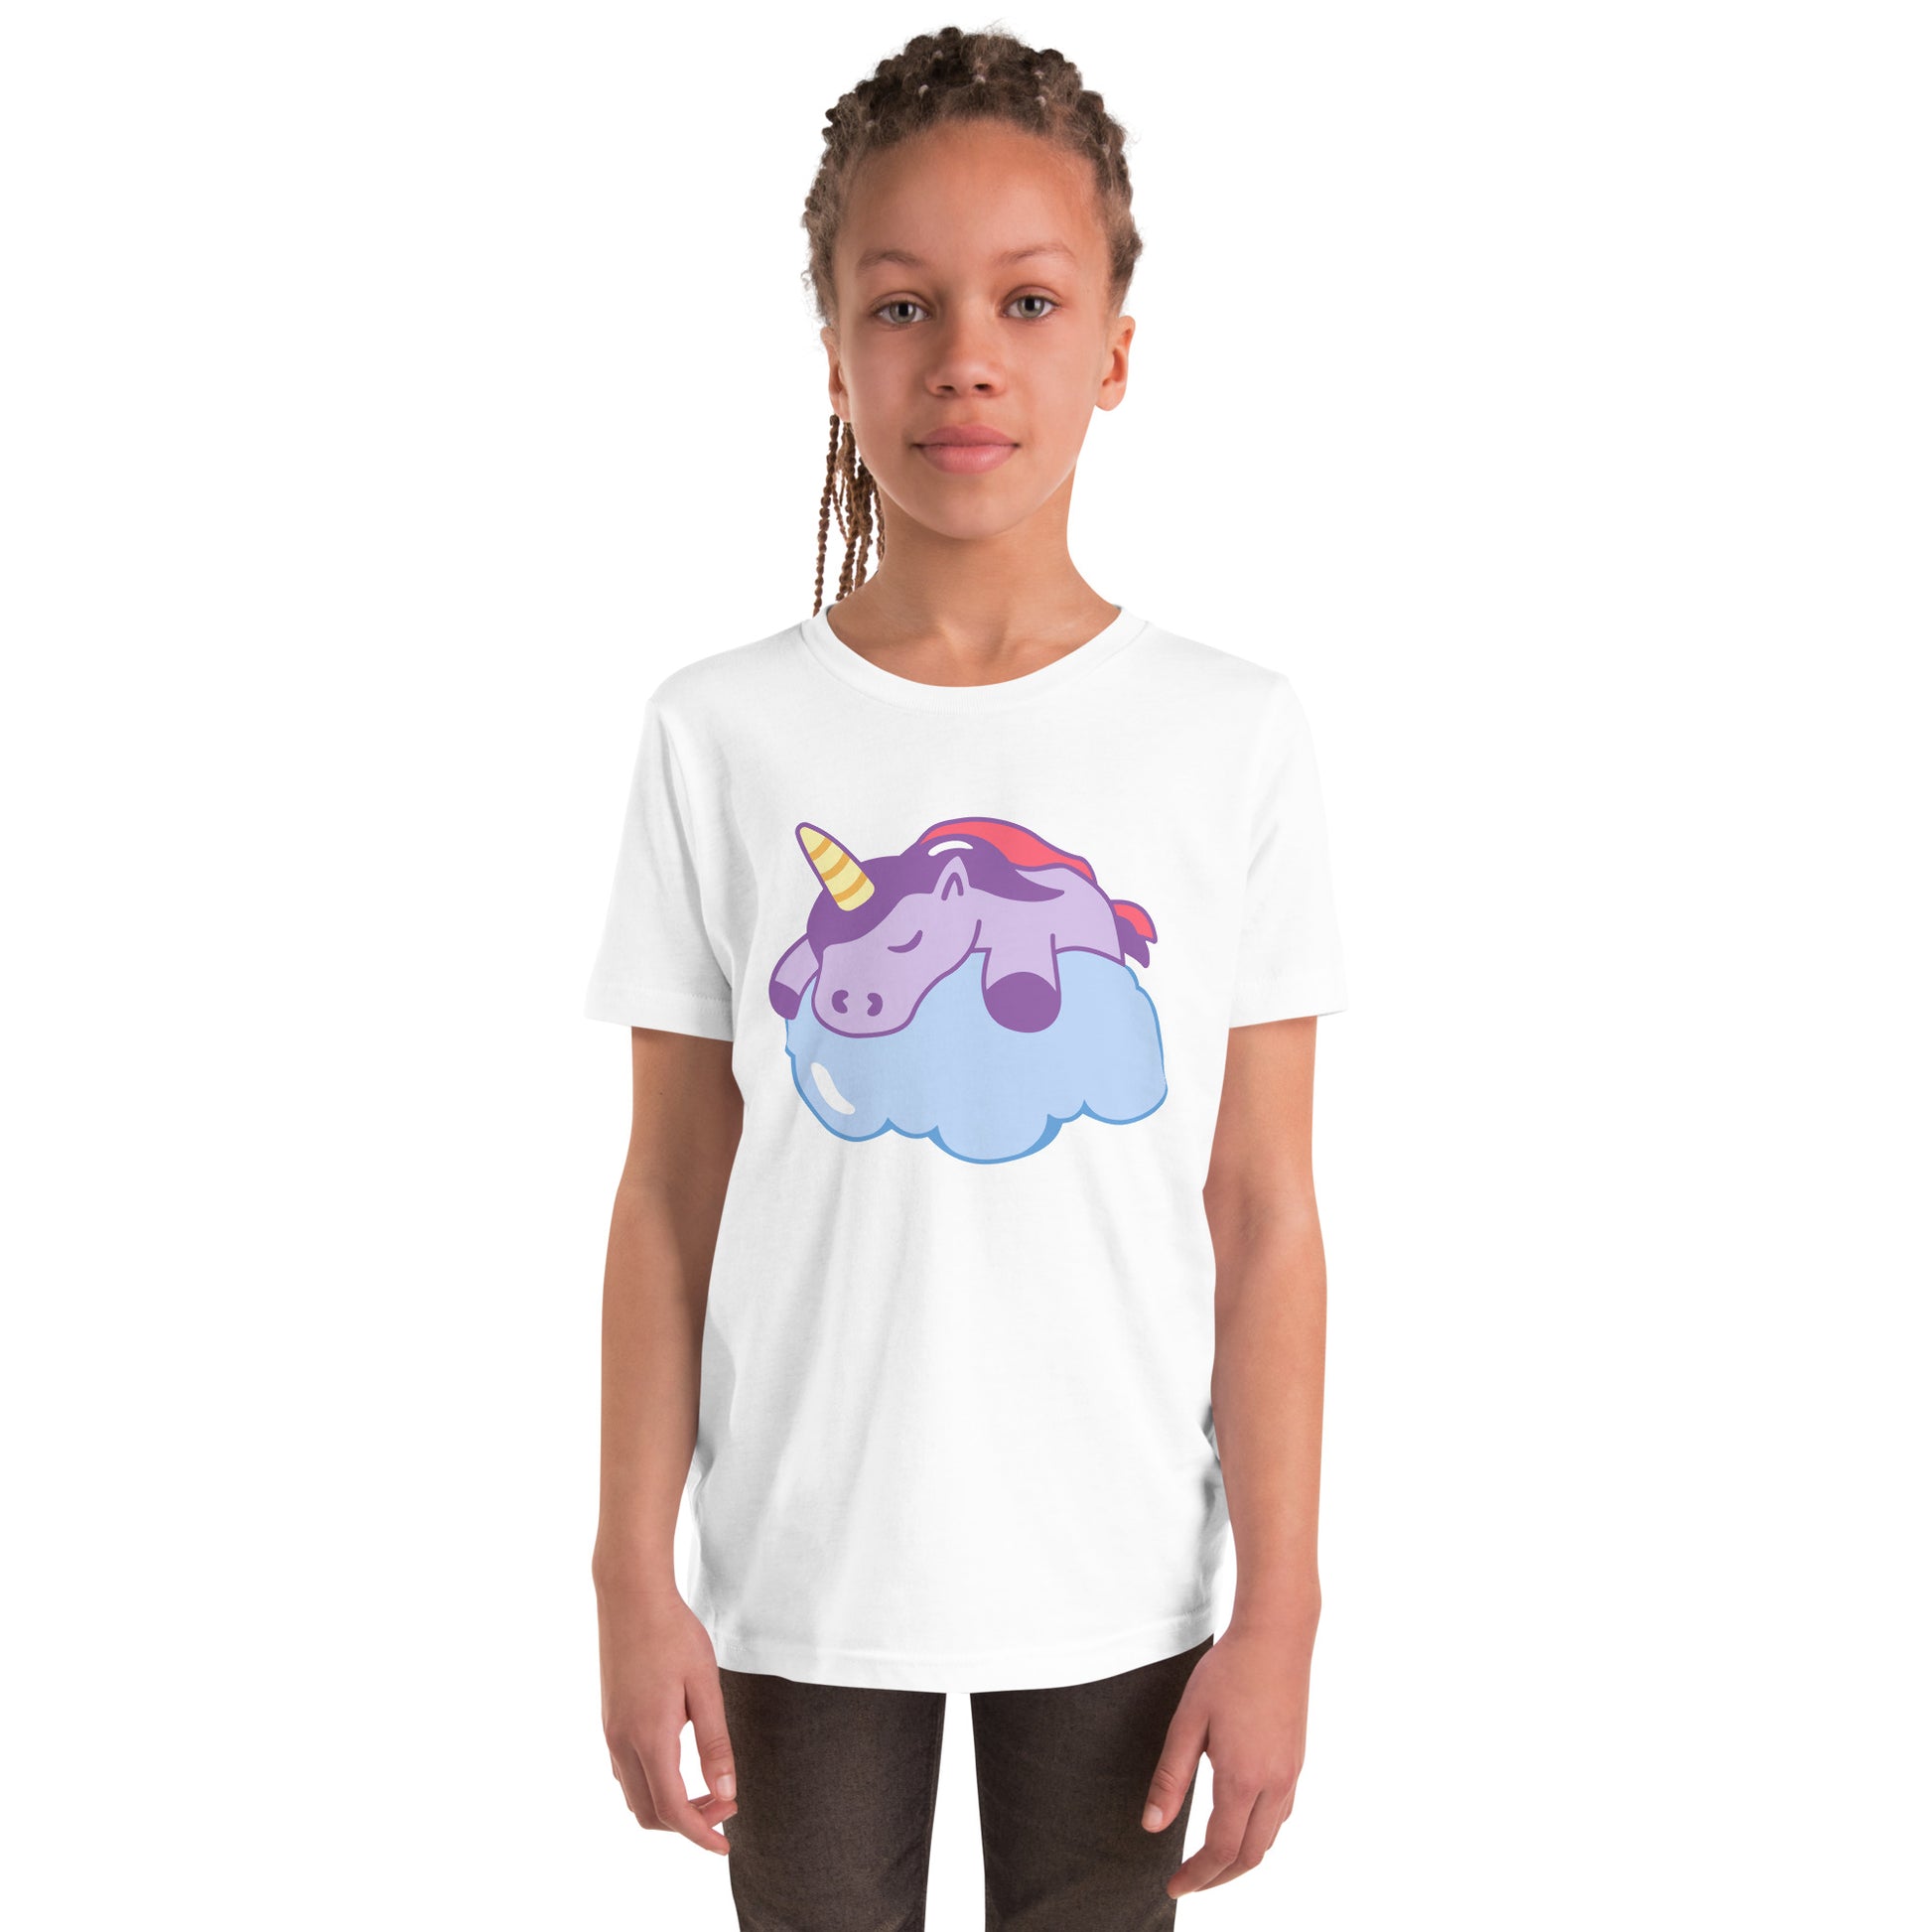 Youth with a white T-shirt with a print of a sleeping unicorn on a cloud